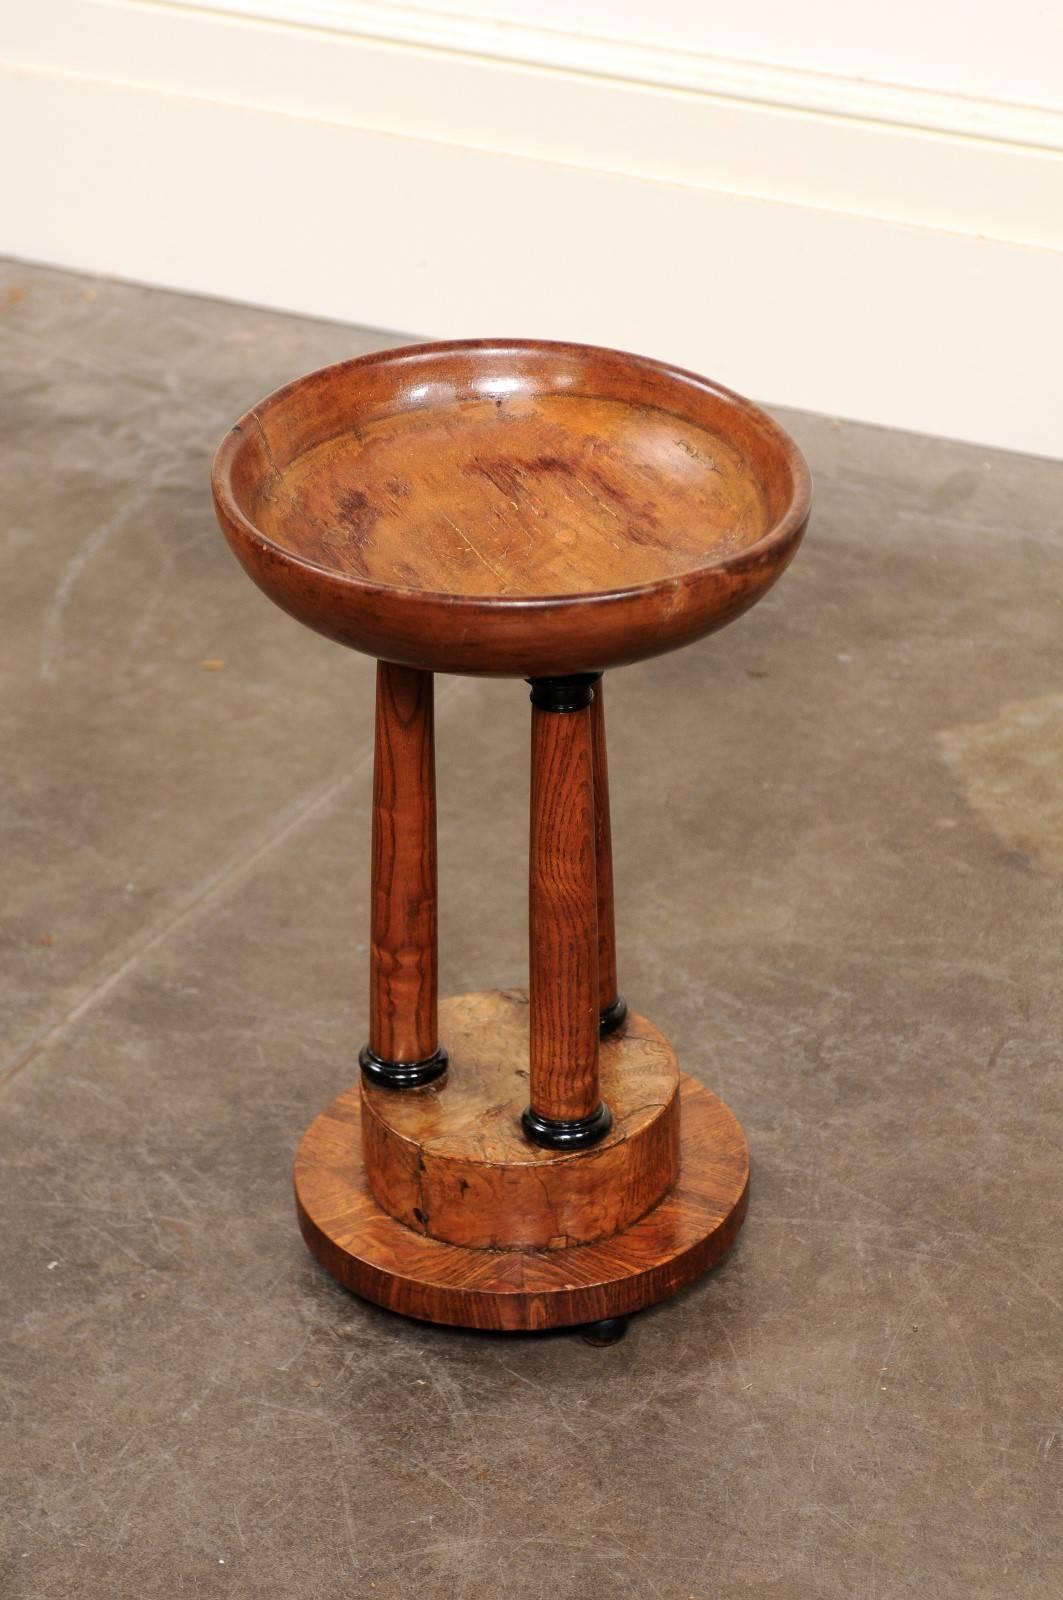 Austrian Biedermeier Wooden Compote with Classical Column Stand, circa 1840 For Sale 2